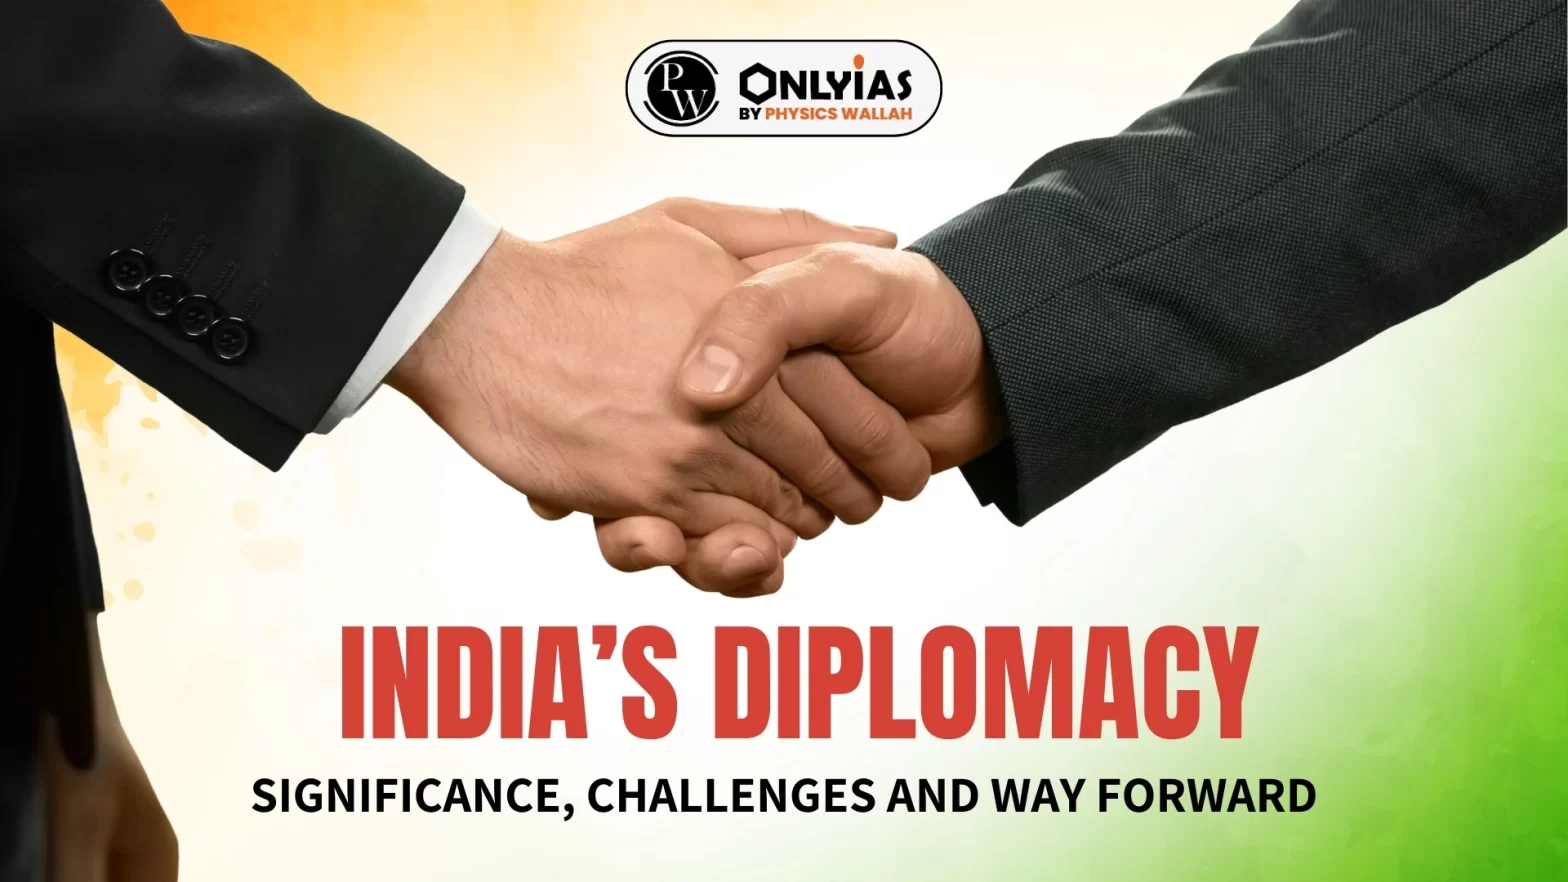 India’s Diplomacy: Significance, Challenges and Way Forward